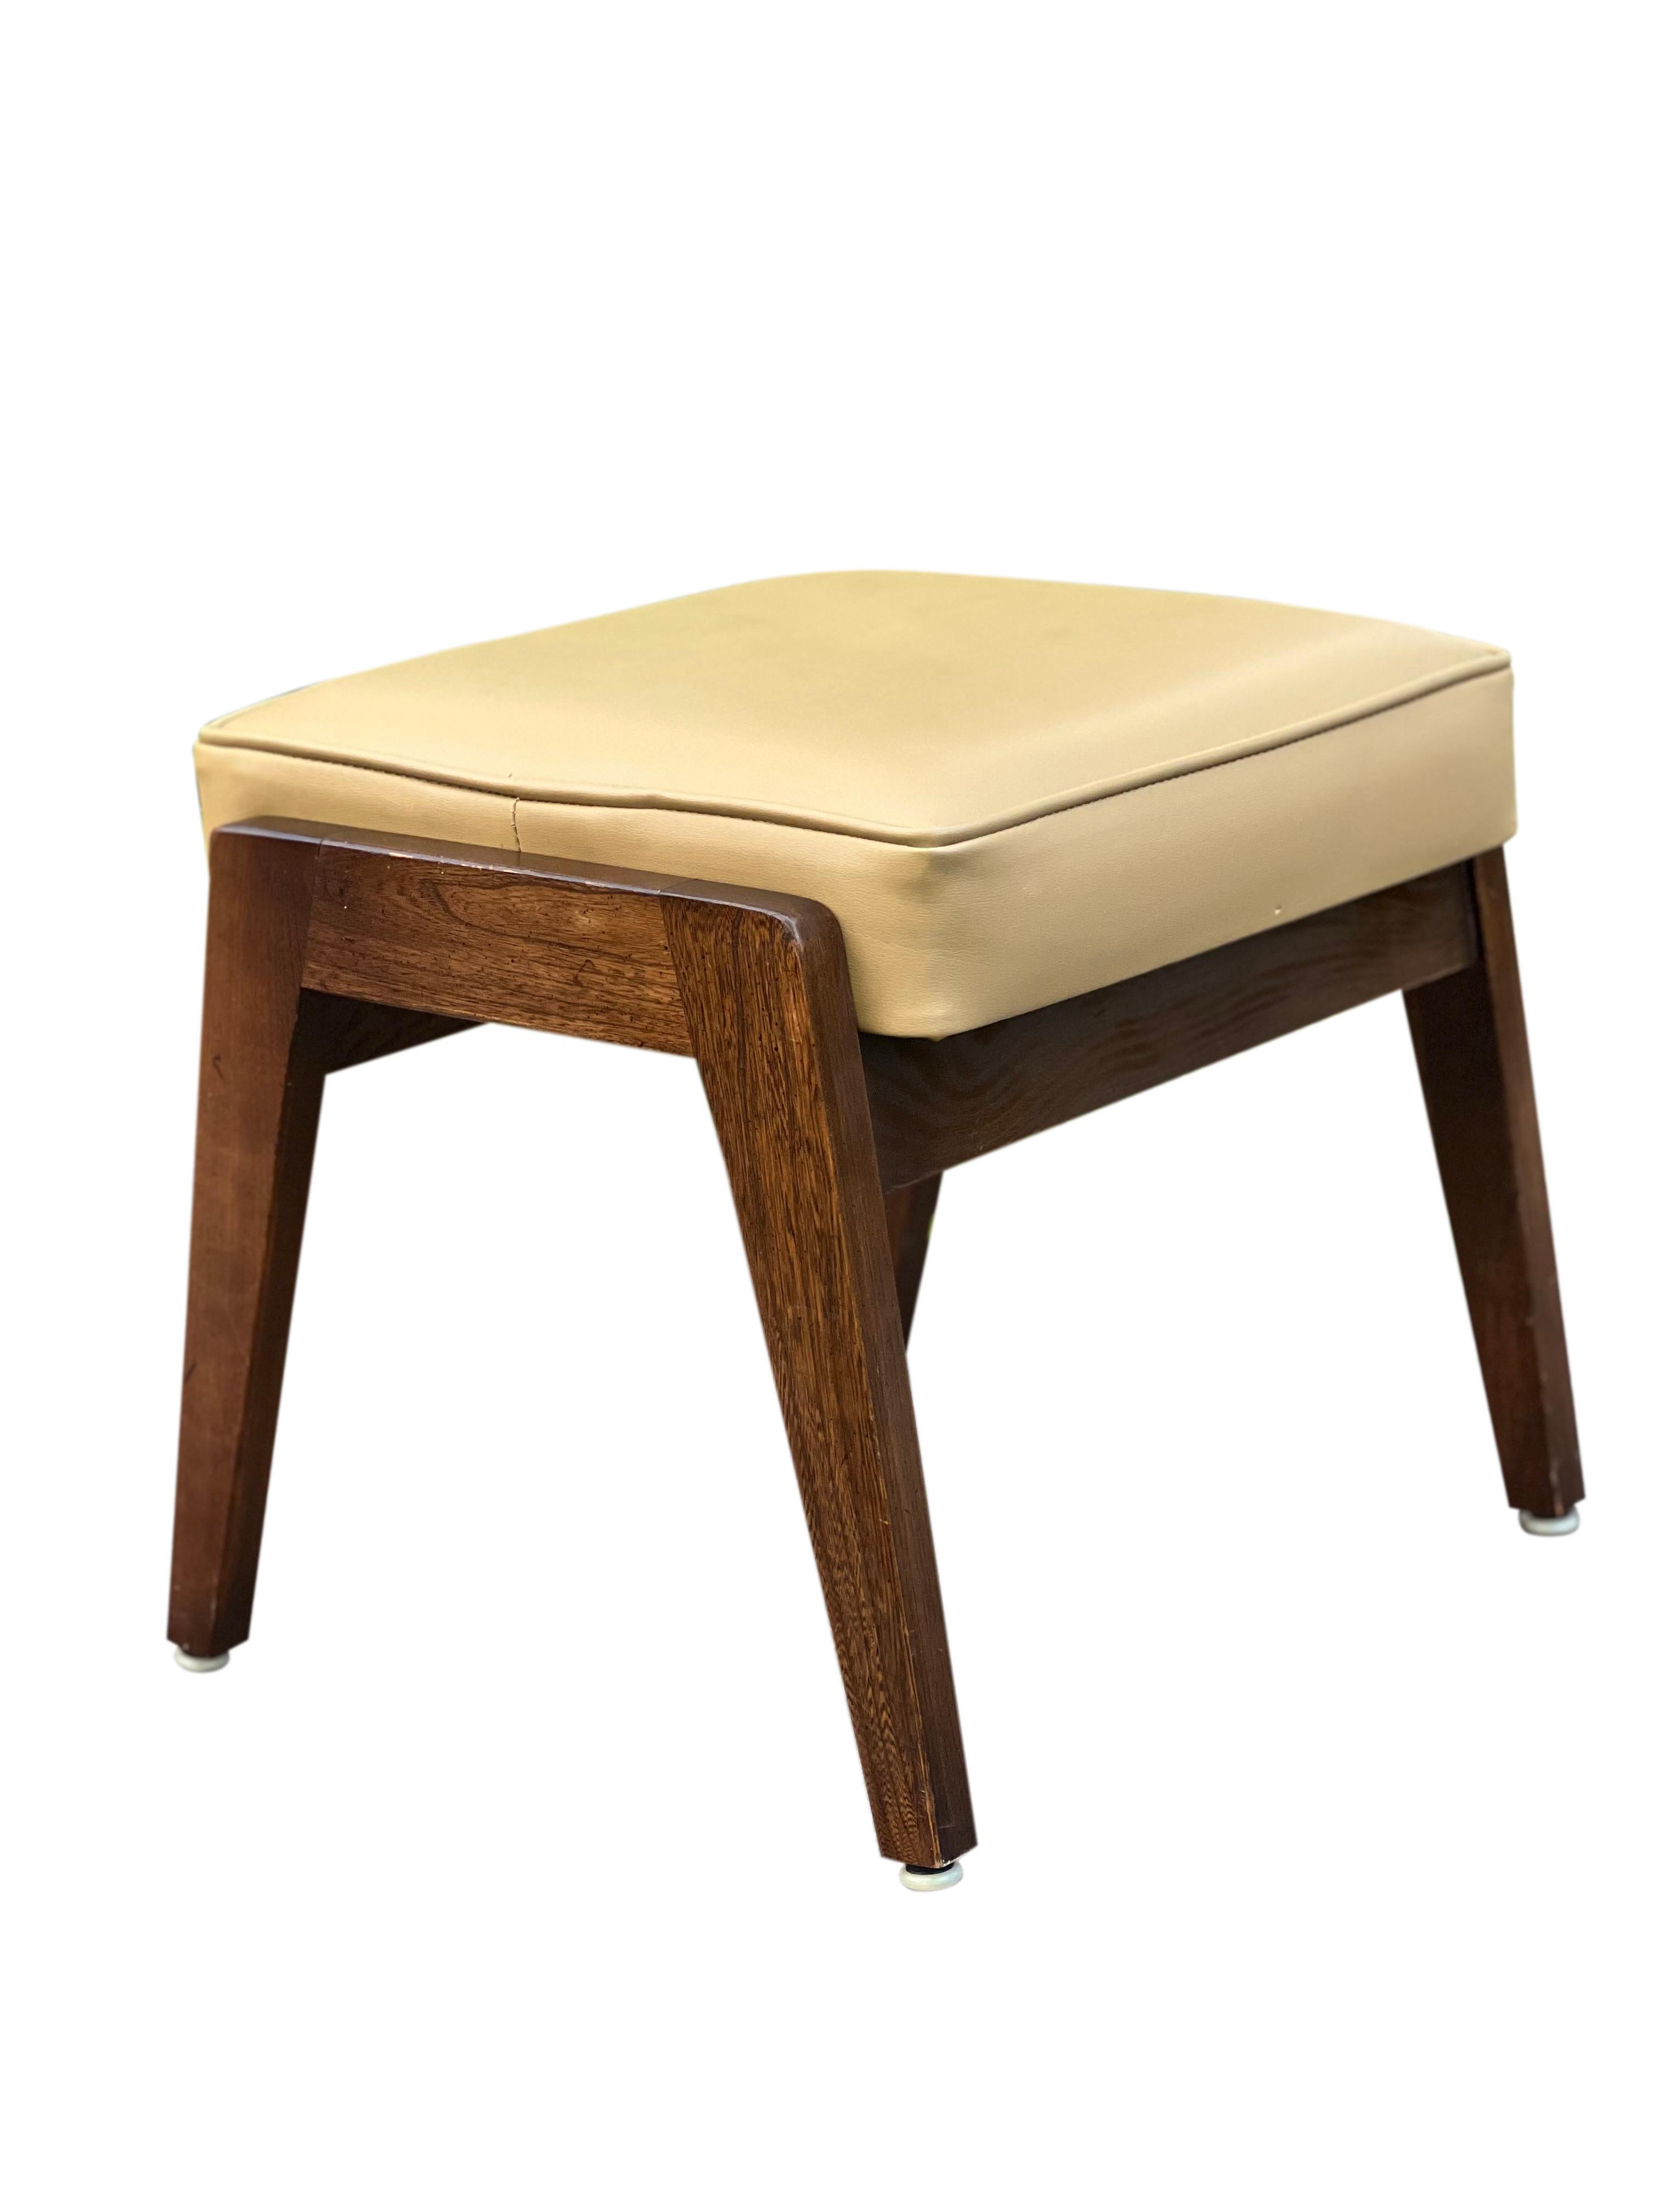 Vintage Mid Century Modern Walnut Upholstered Footstool In Good Condition For Sale In Doylestown, PA